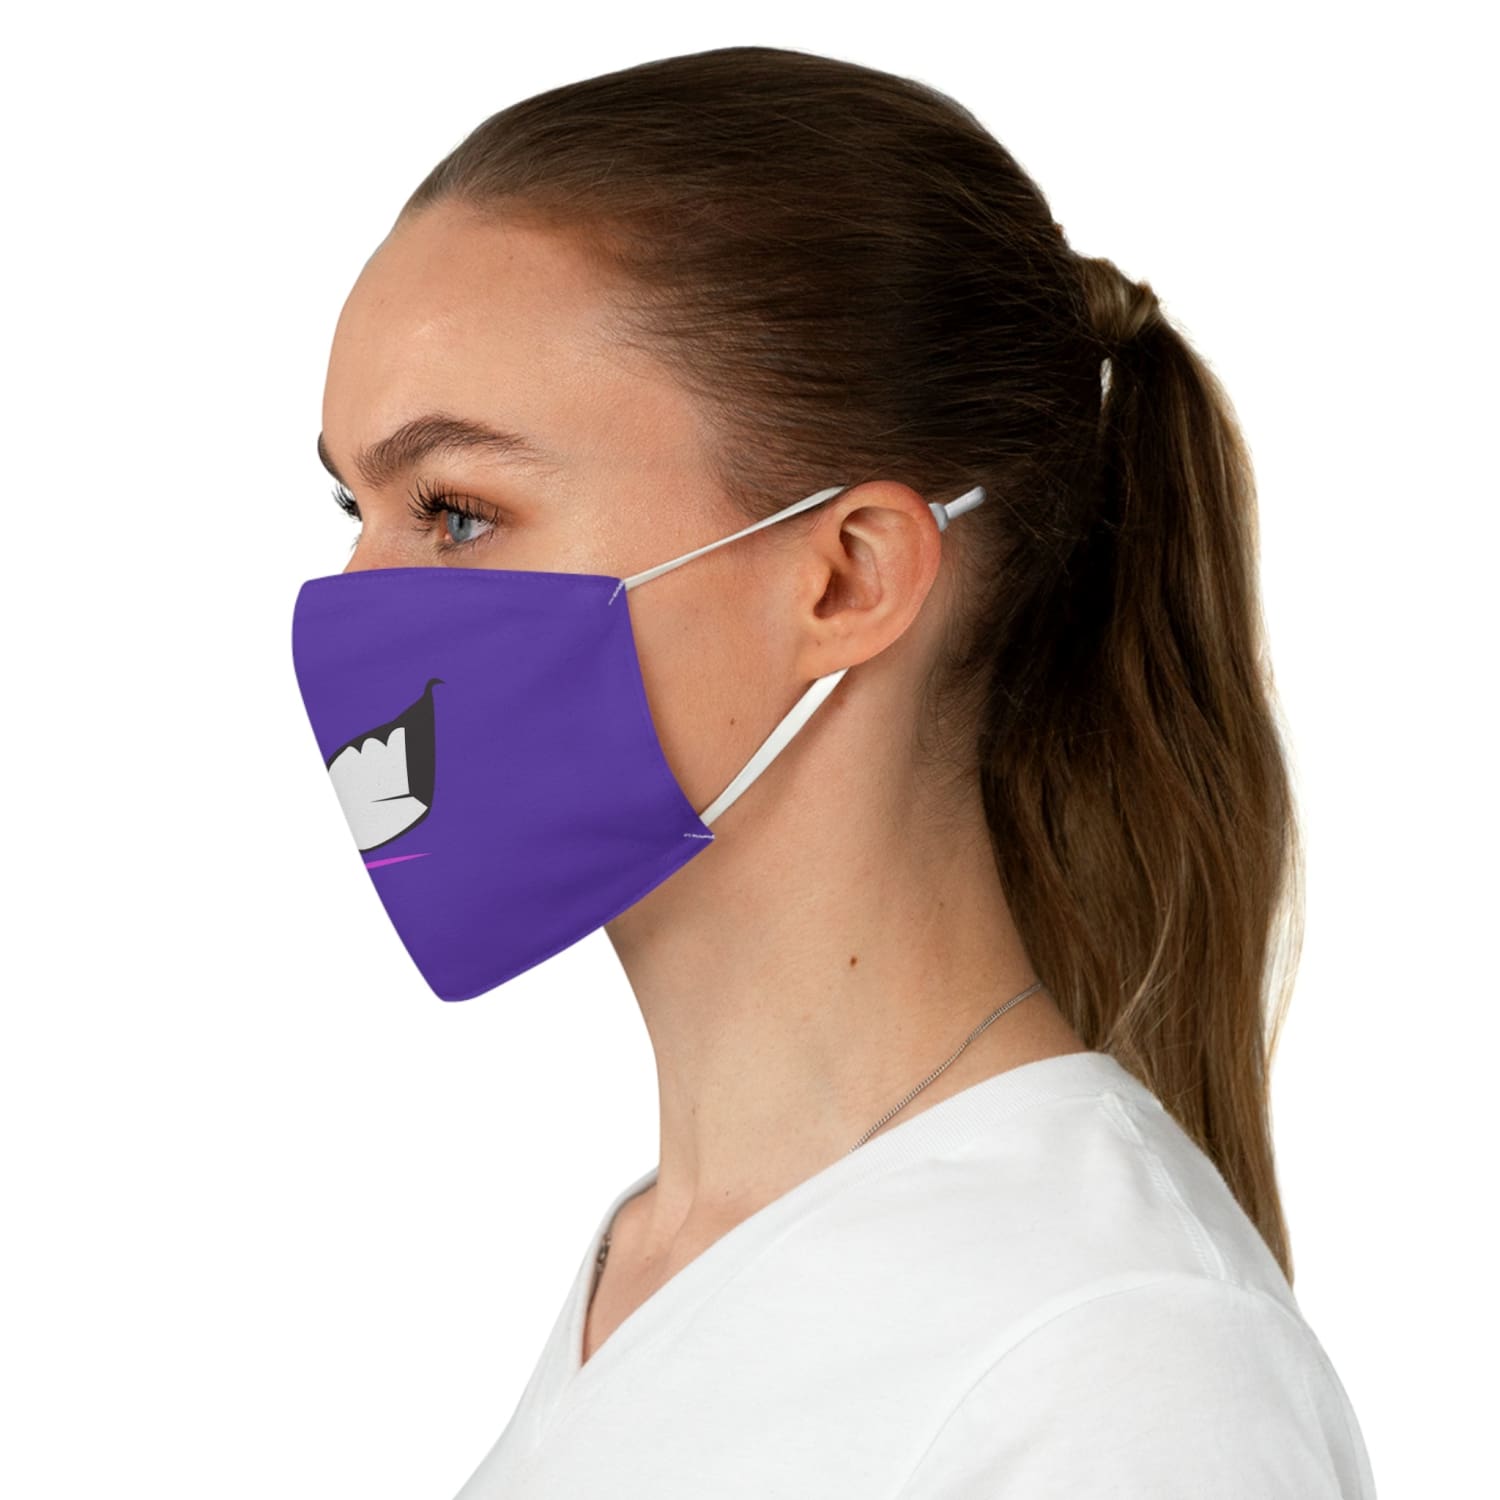 Purple Toothy Grin Fabric Face Mask - One size - Accessories